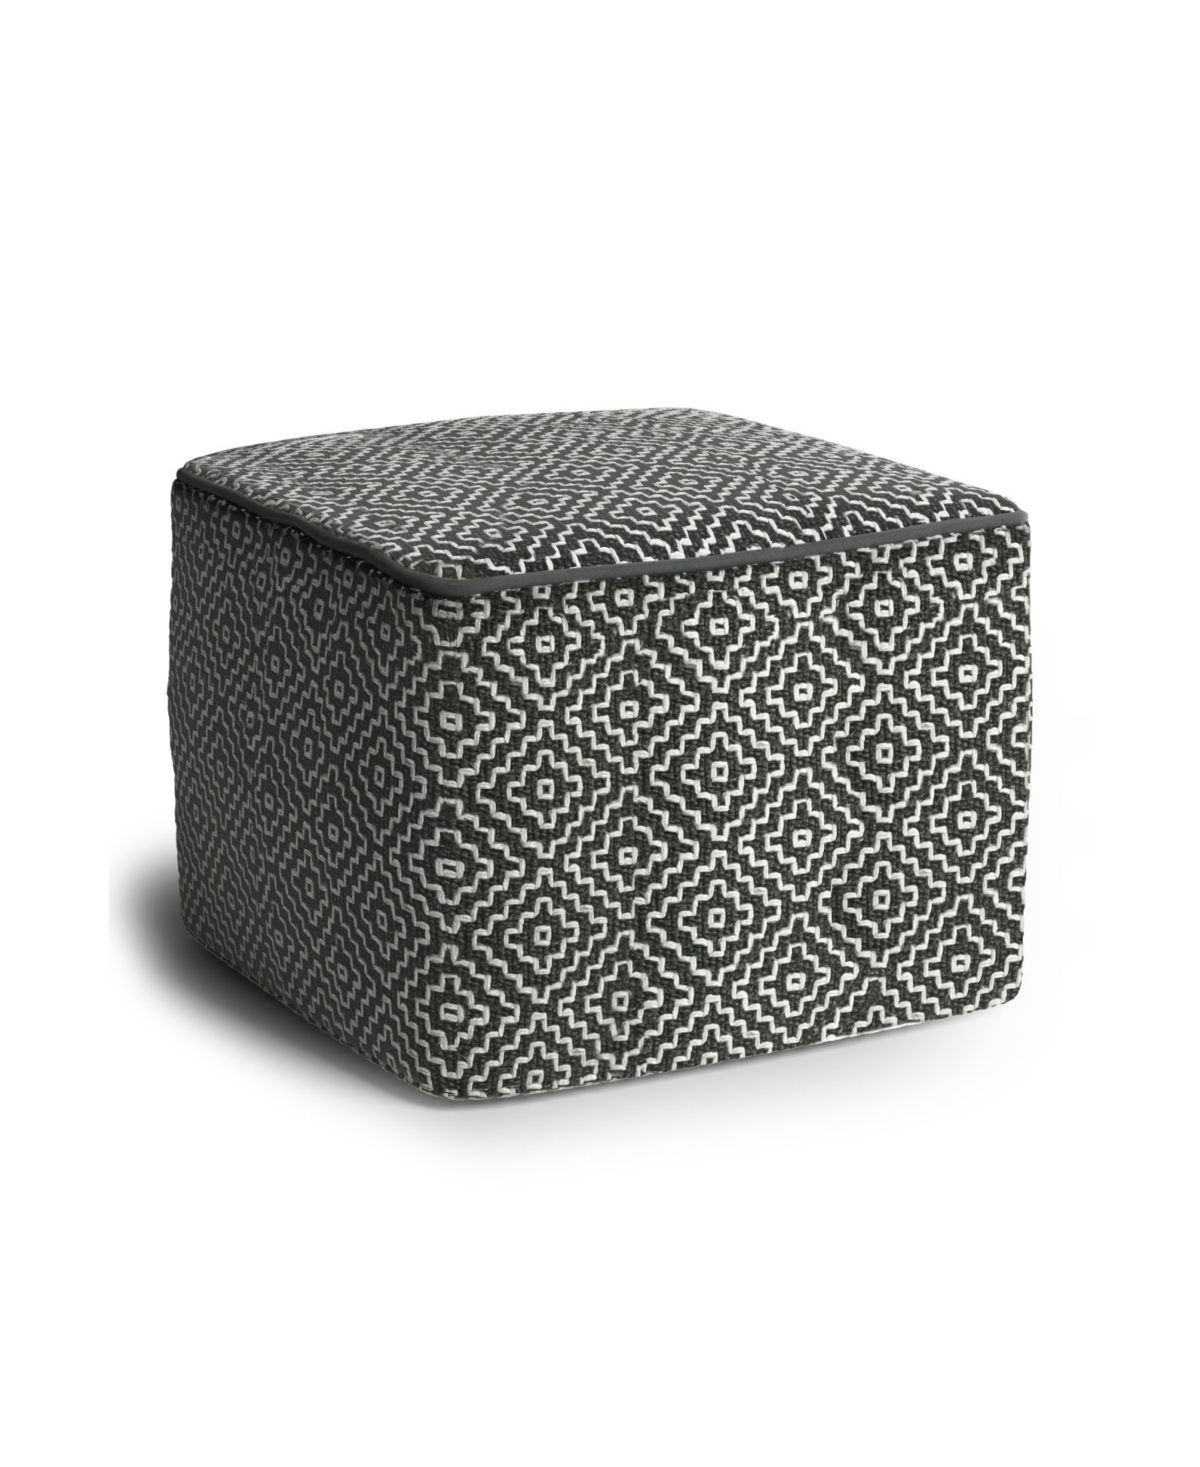 Macy's Briella Square Woven Outdoor And Indoor Pouf In Gray And White